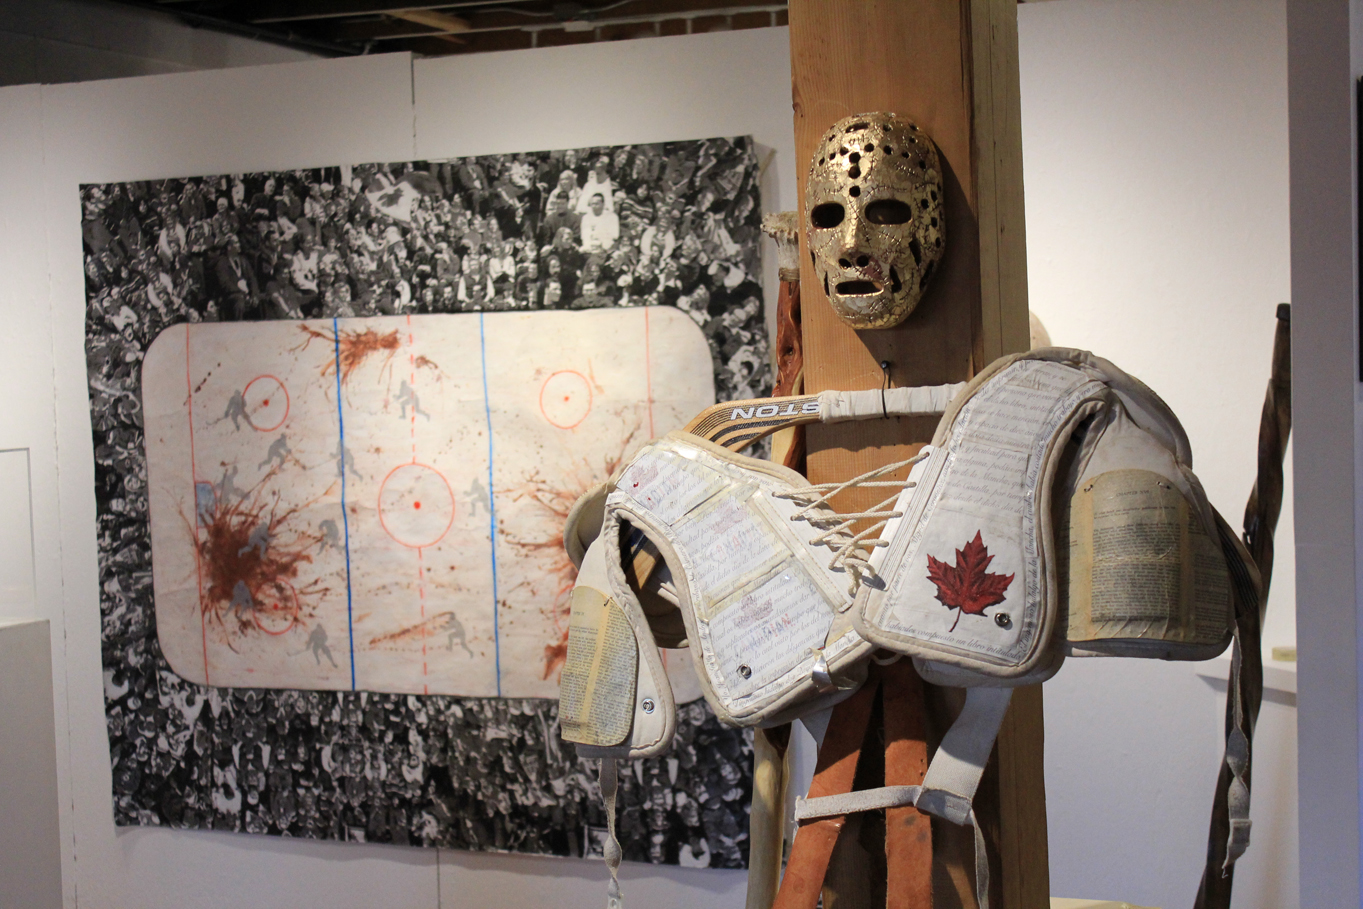 “Comedy/Tragedy/Hockey” includes the armor worn by actor Brian Hutton for the “Don Quixote Project,” a video installation in the show.-Photos by Fermin Martinez